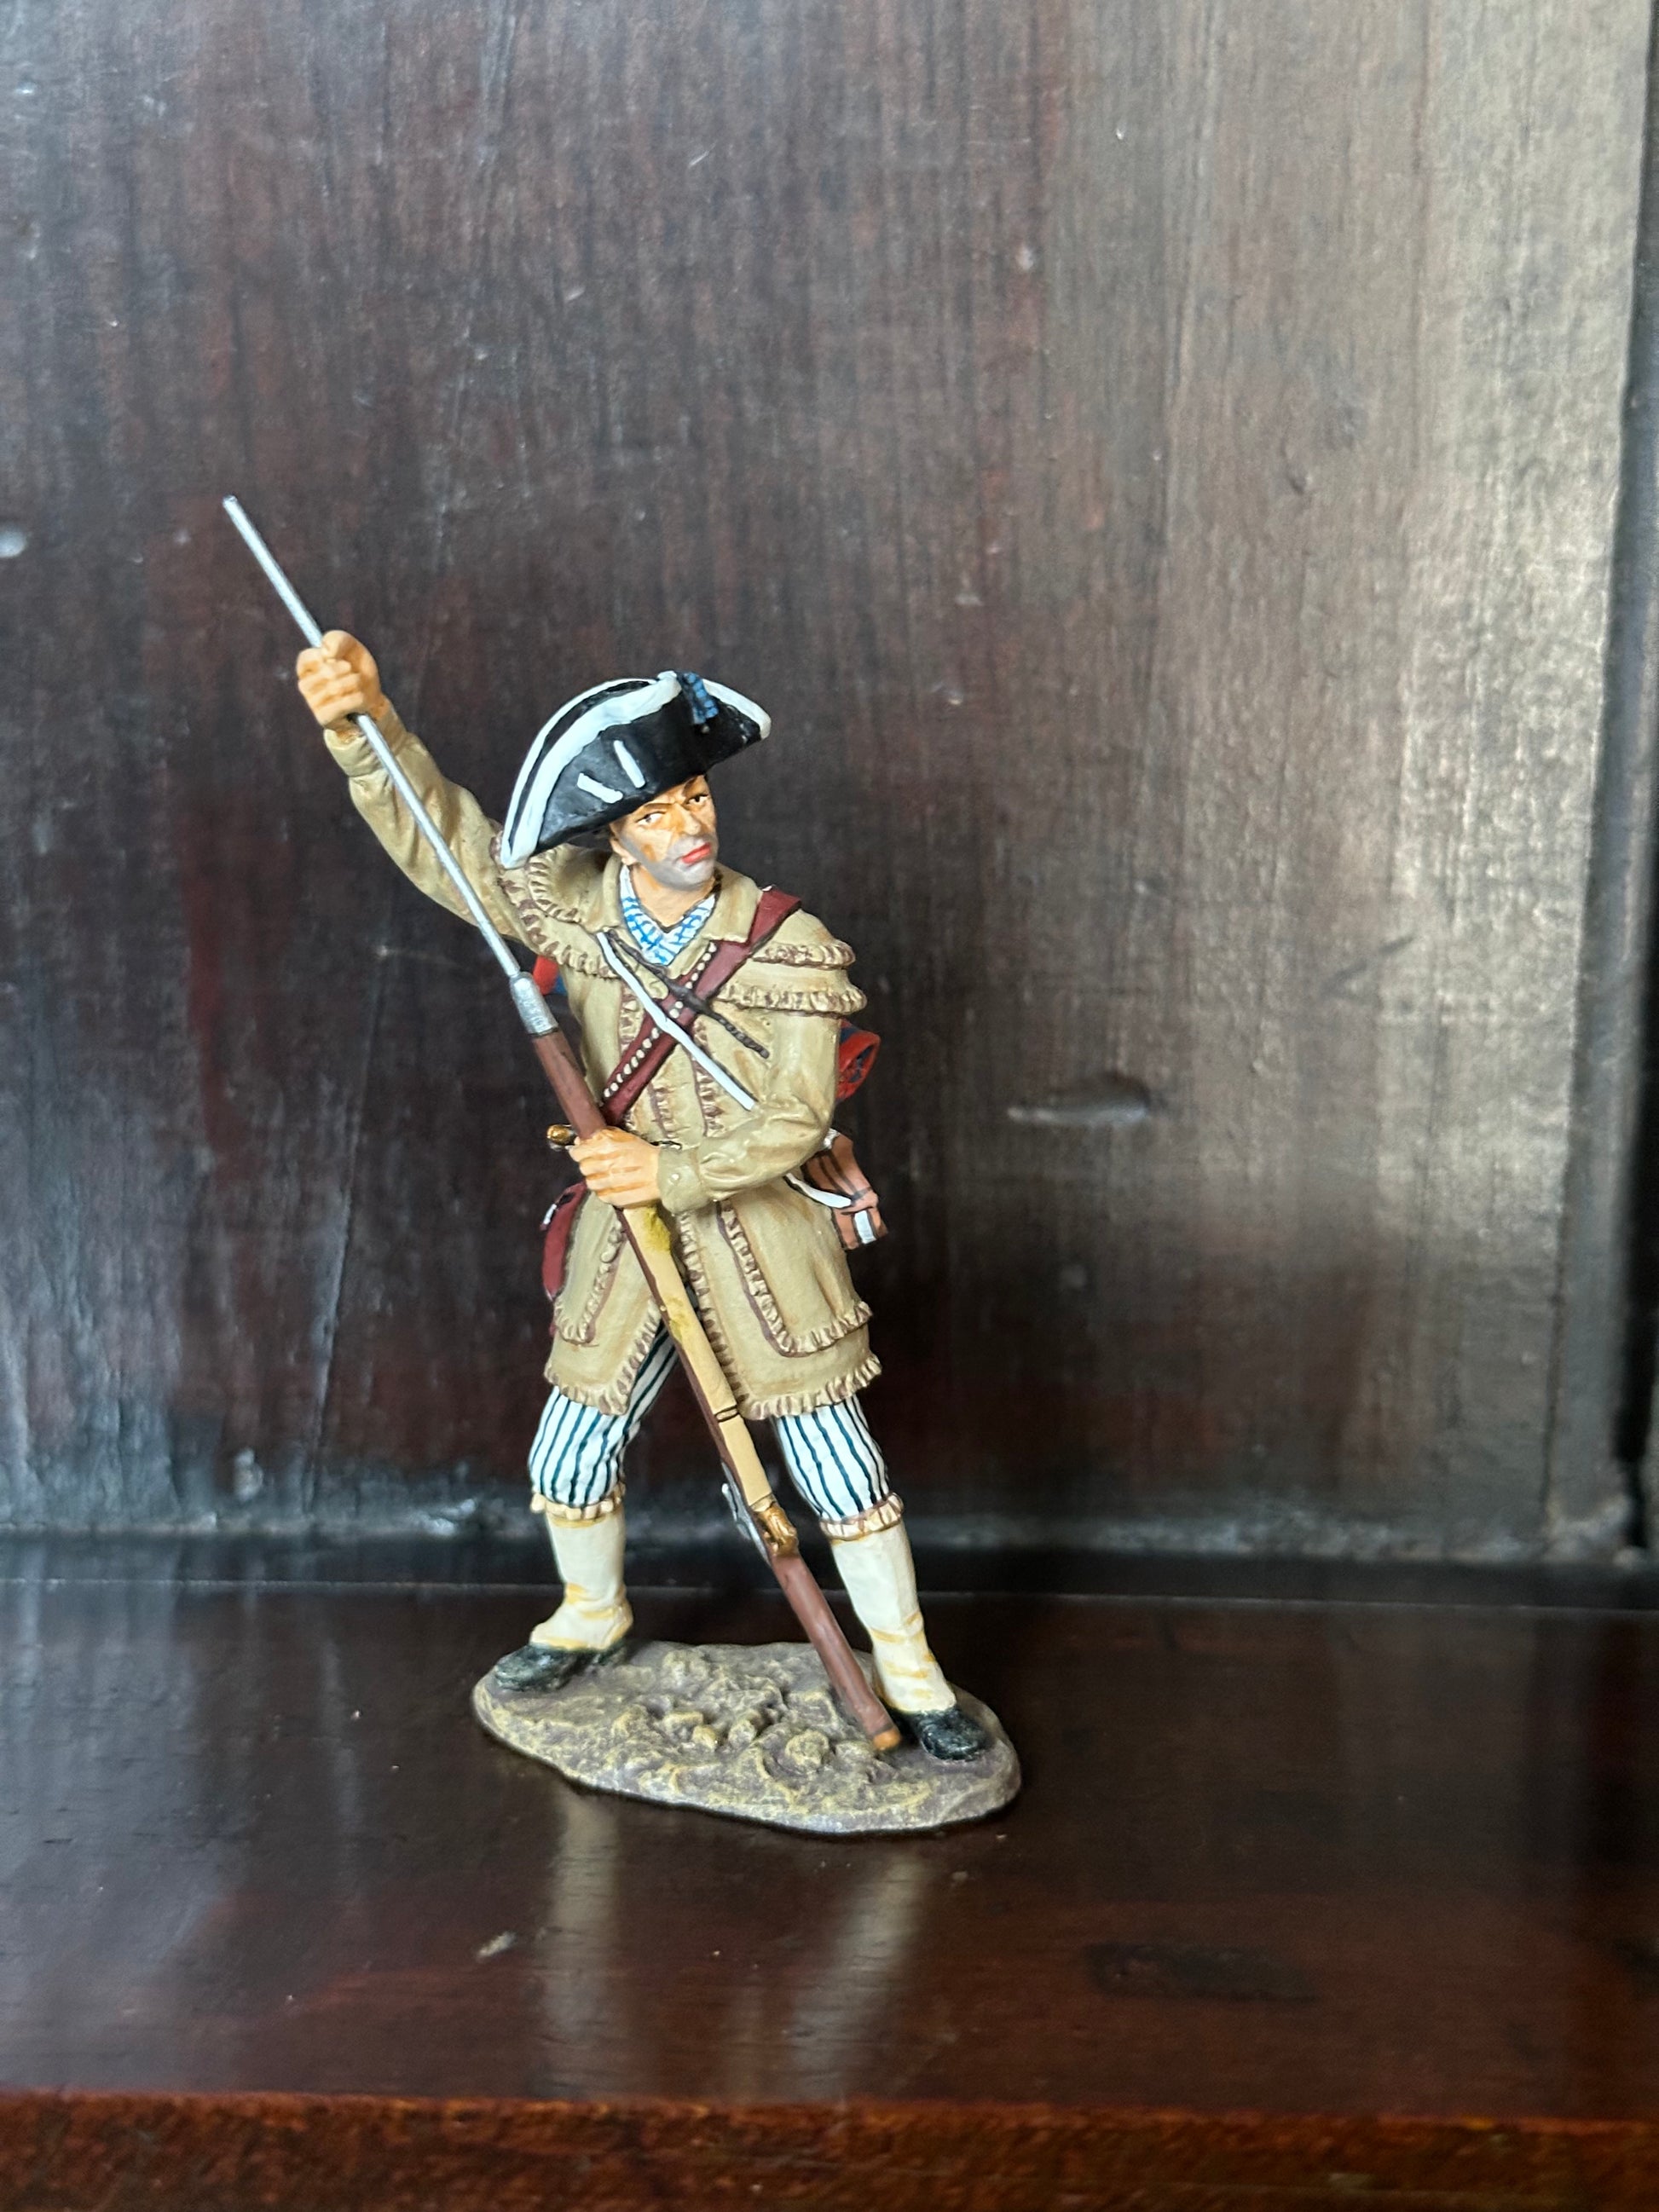 Collectible toy soldier miniature army men Militiaman Loading. Displayed on a shelf.